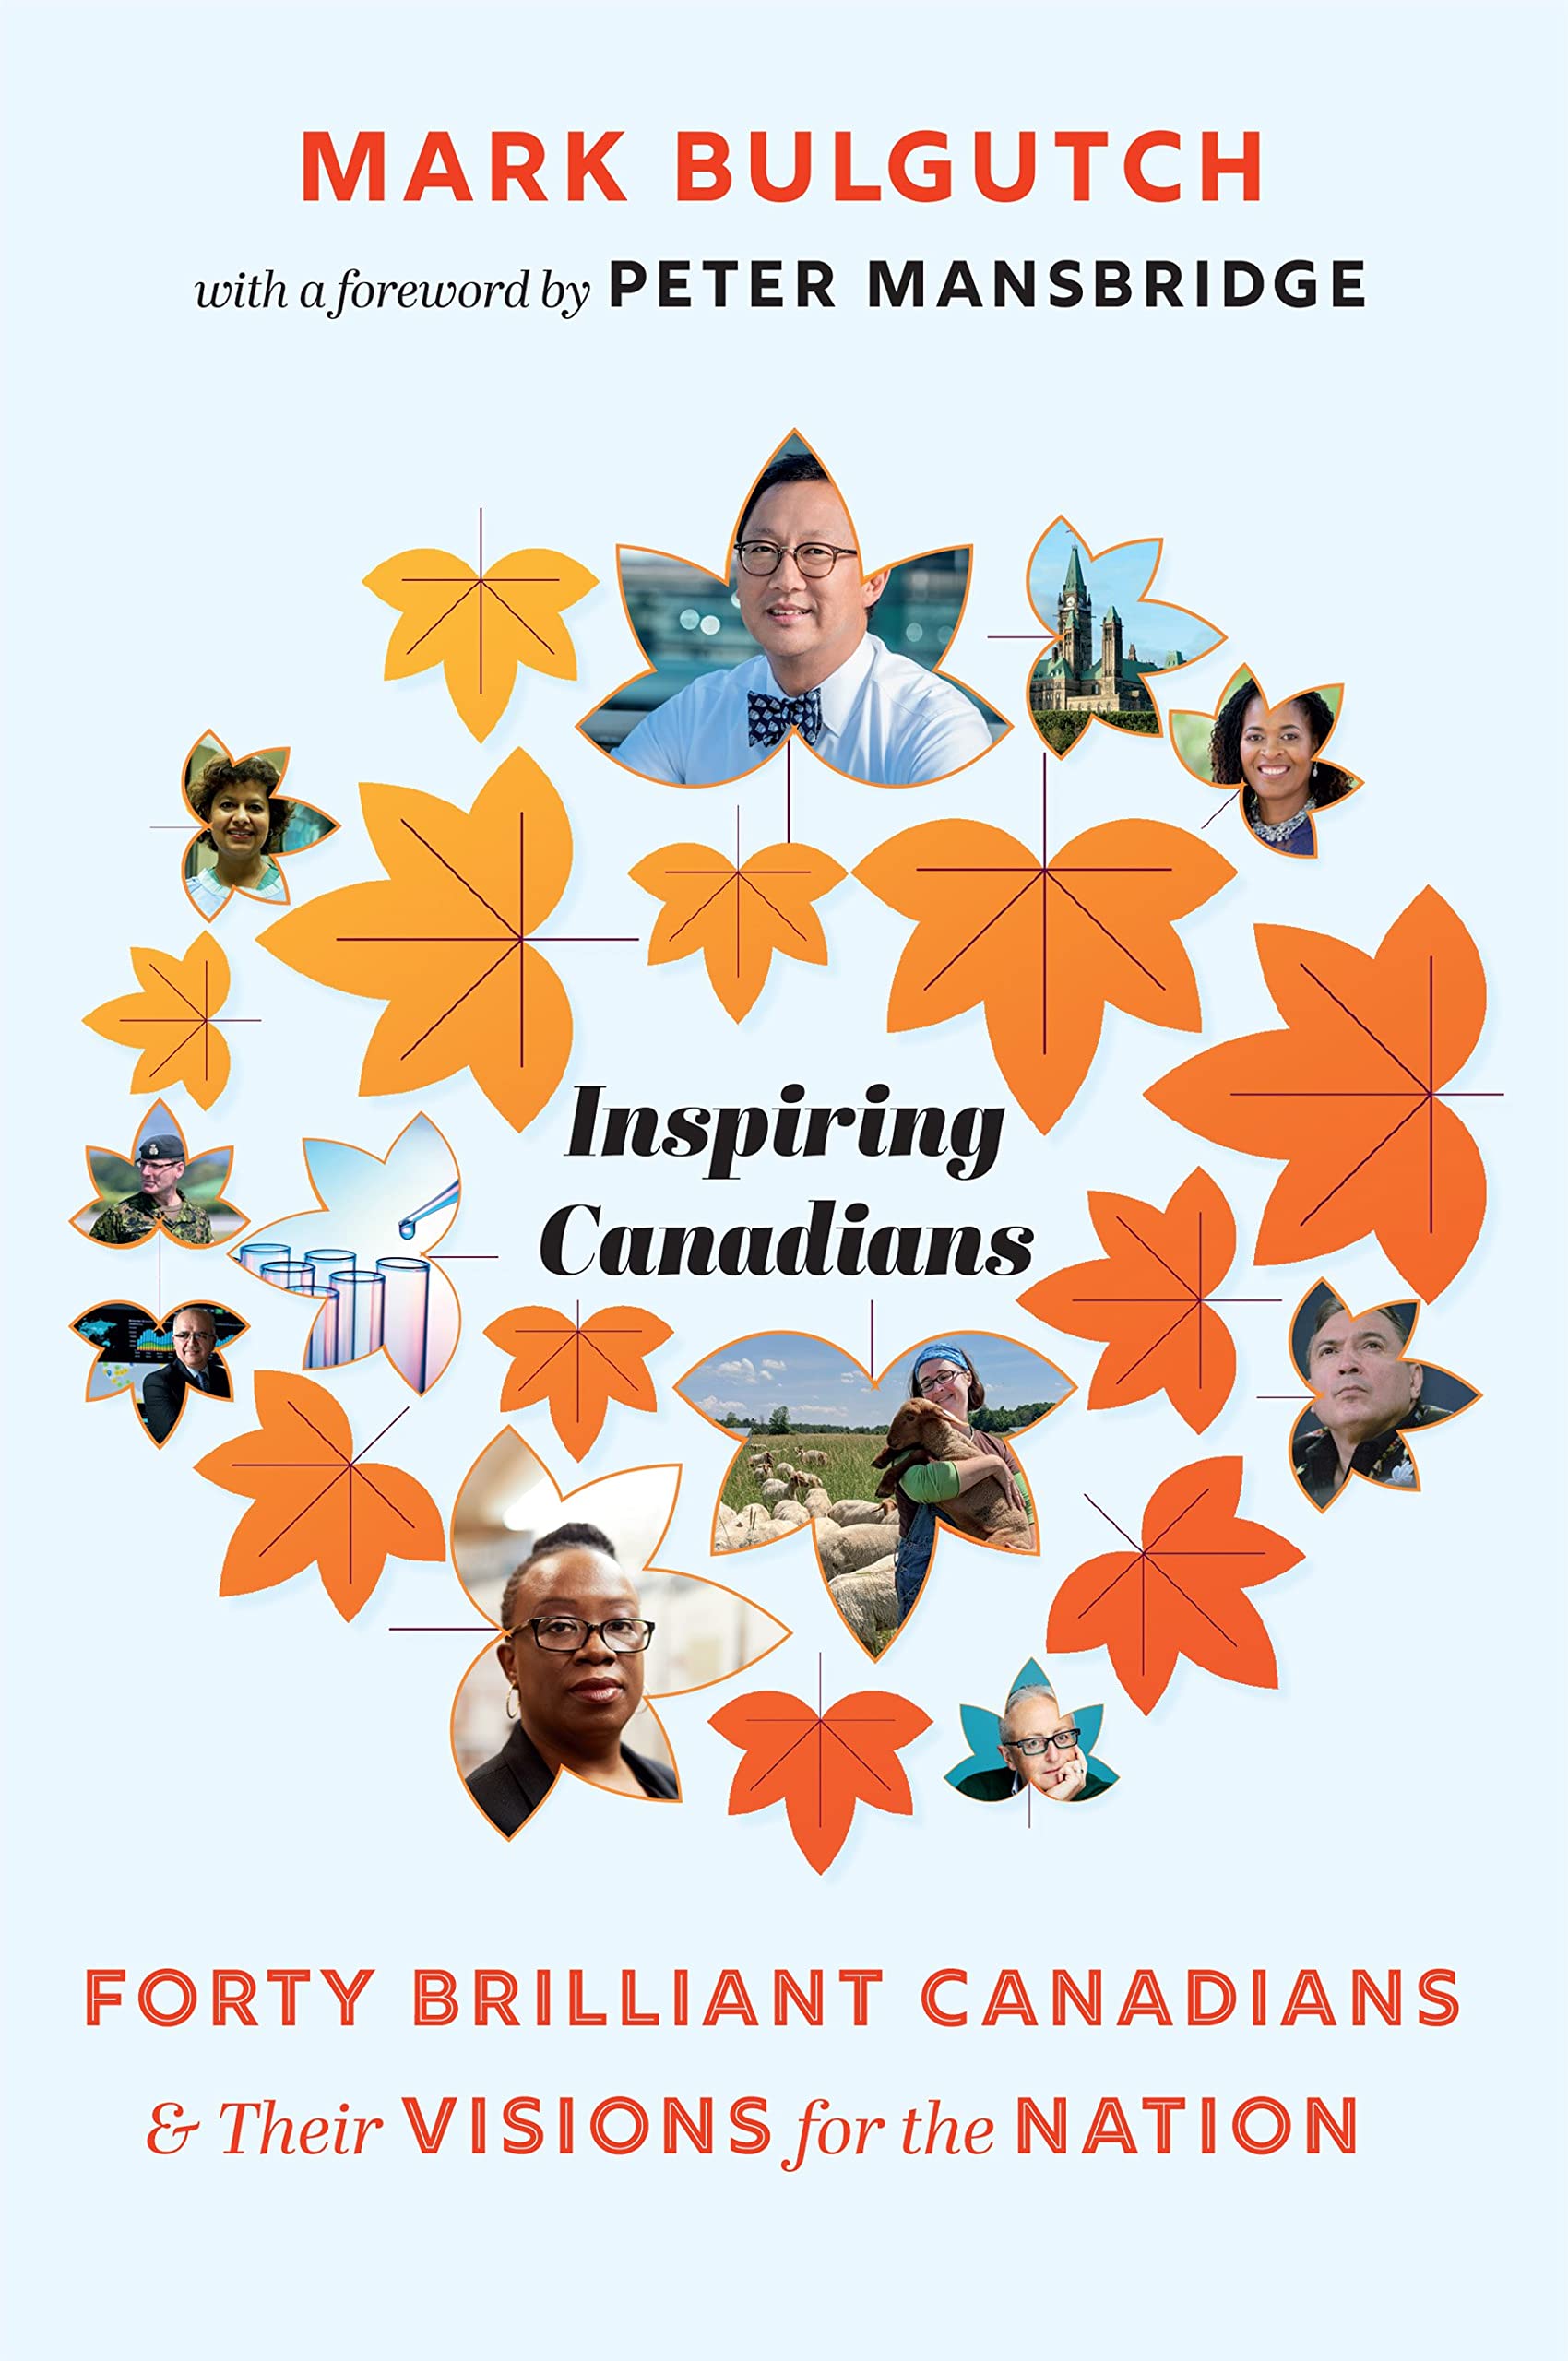 The cover of Inspiring Canadians by Mark Bulgutch.